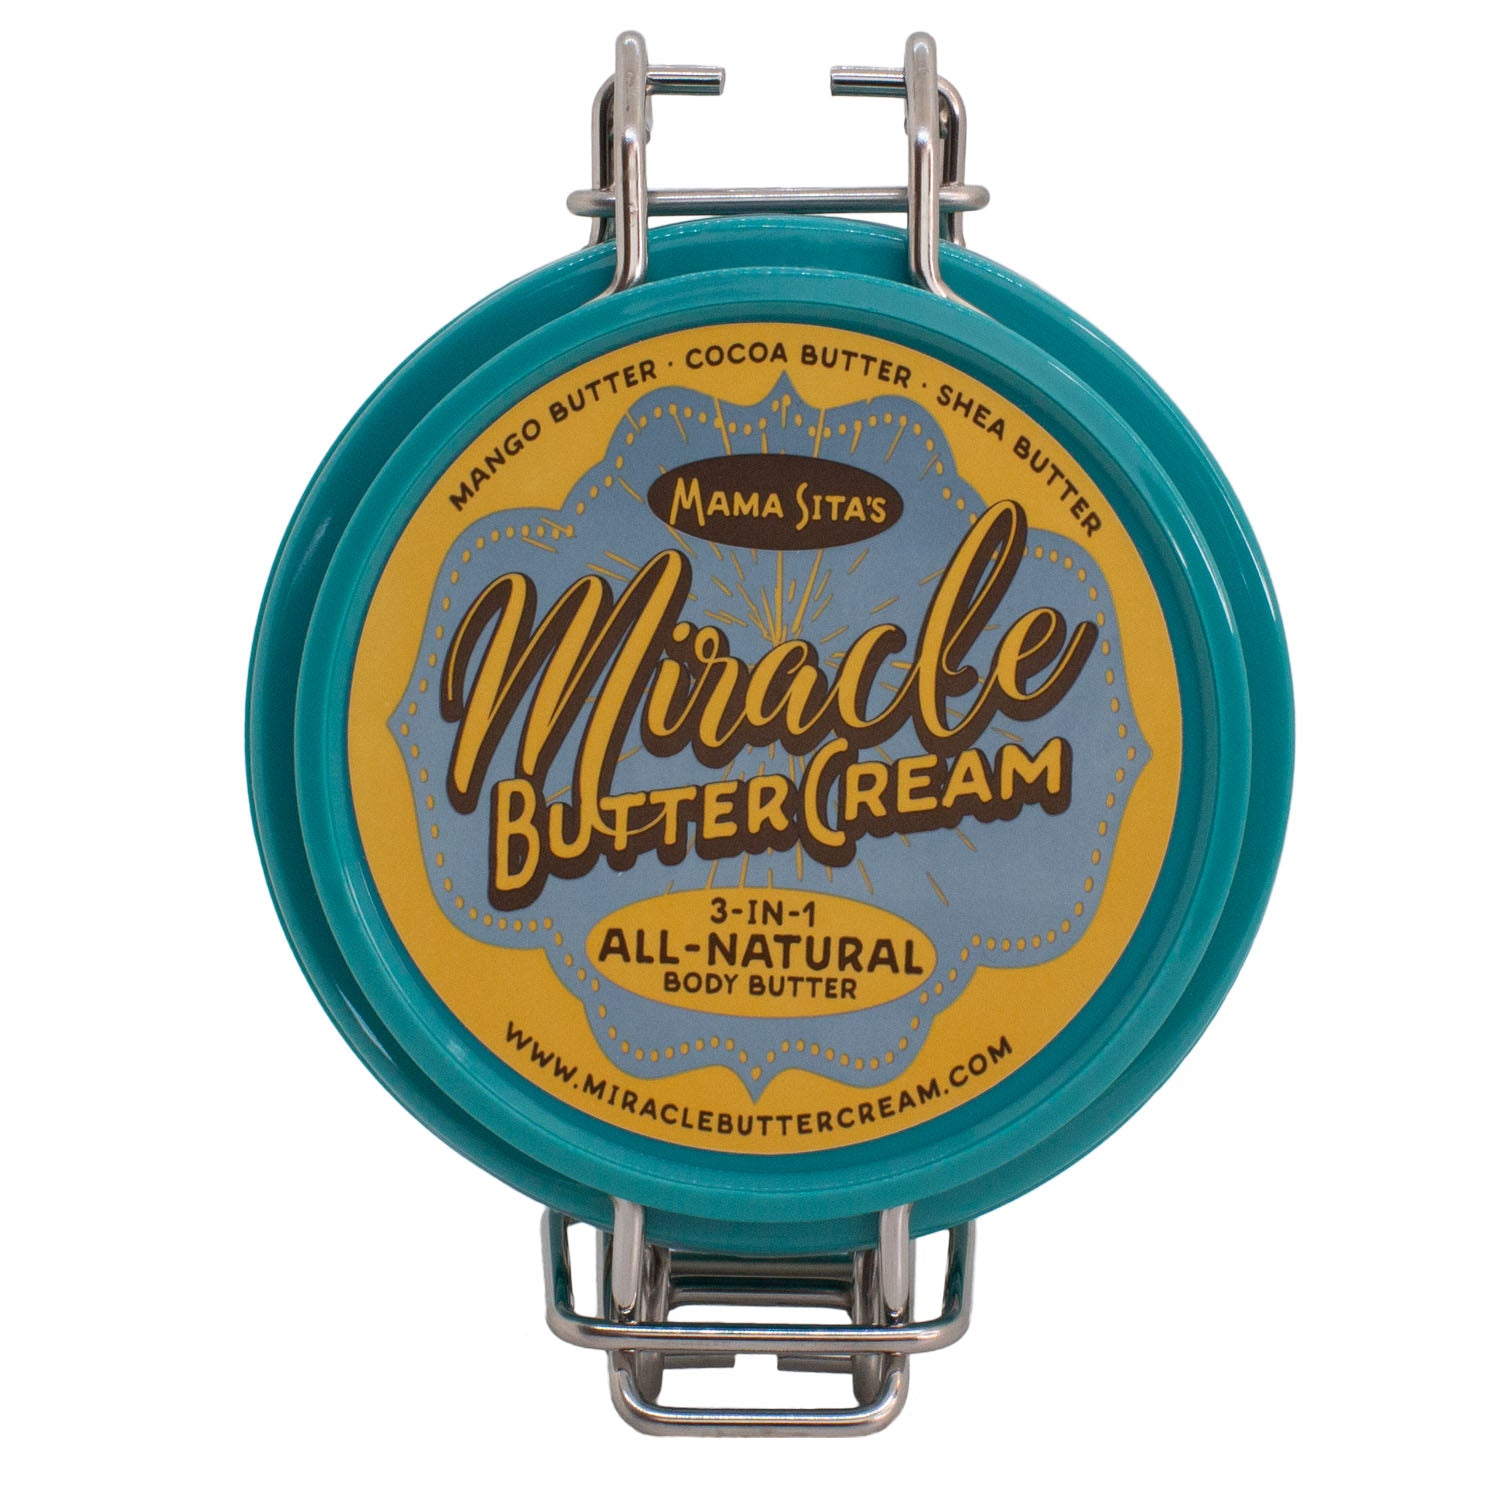 (Natural) Unscented/Fragrance-Free Miracle Butter Cream 16oz. lid, miraclebuttercream.com